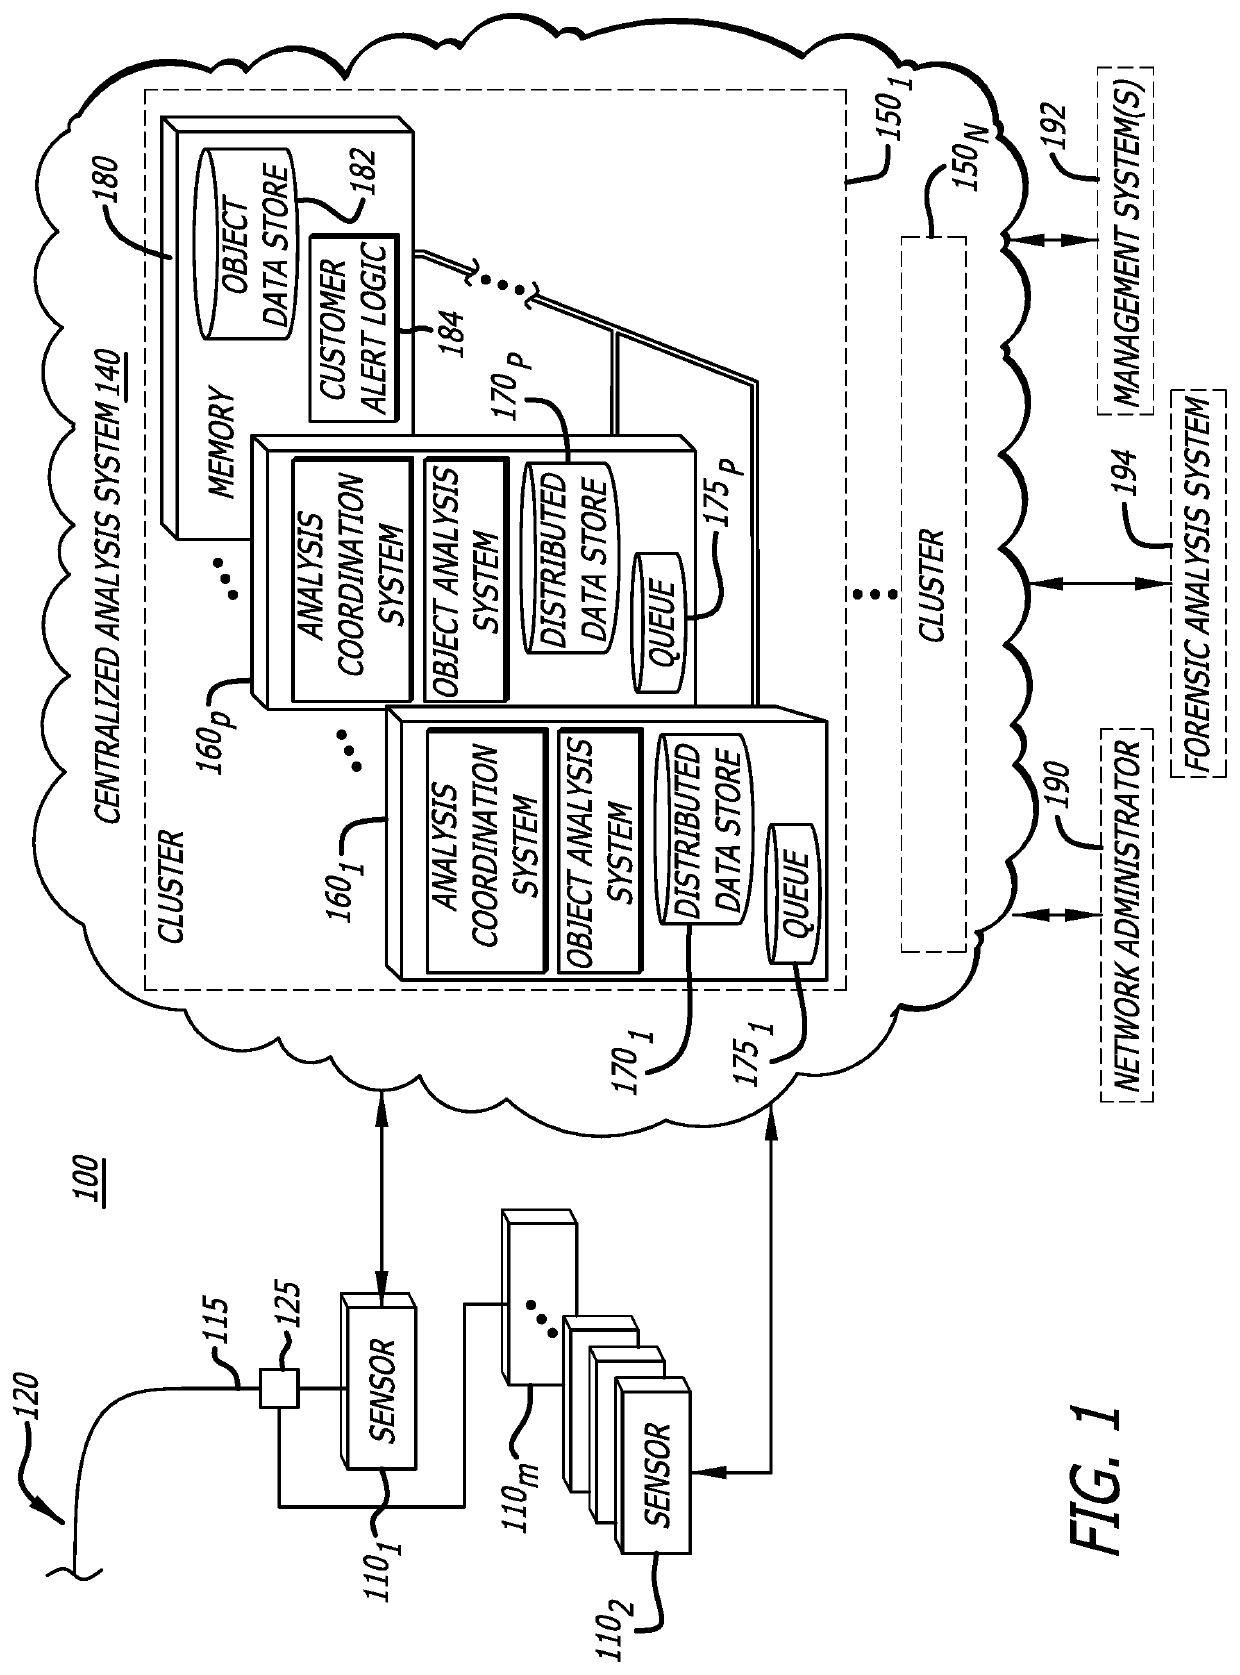 Cluster configuration within a scalable malware detection system